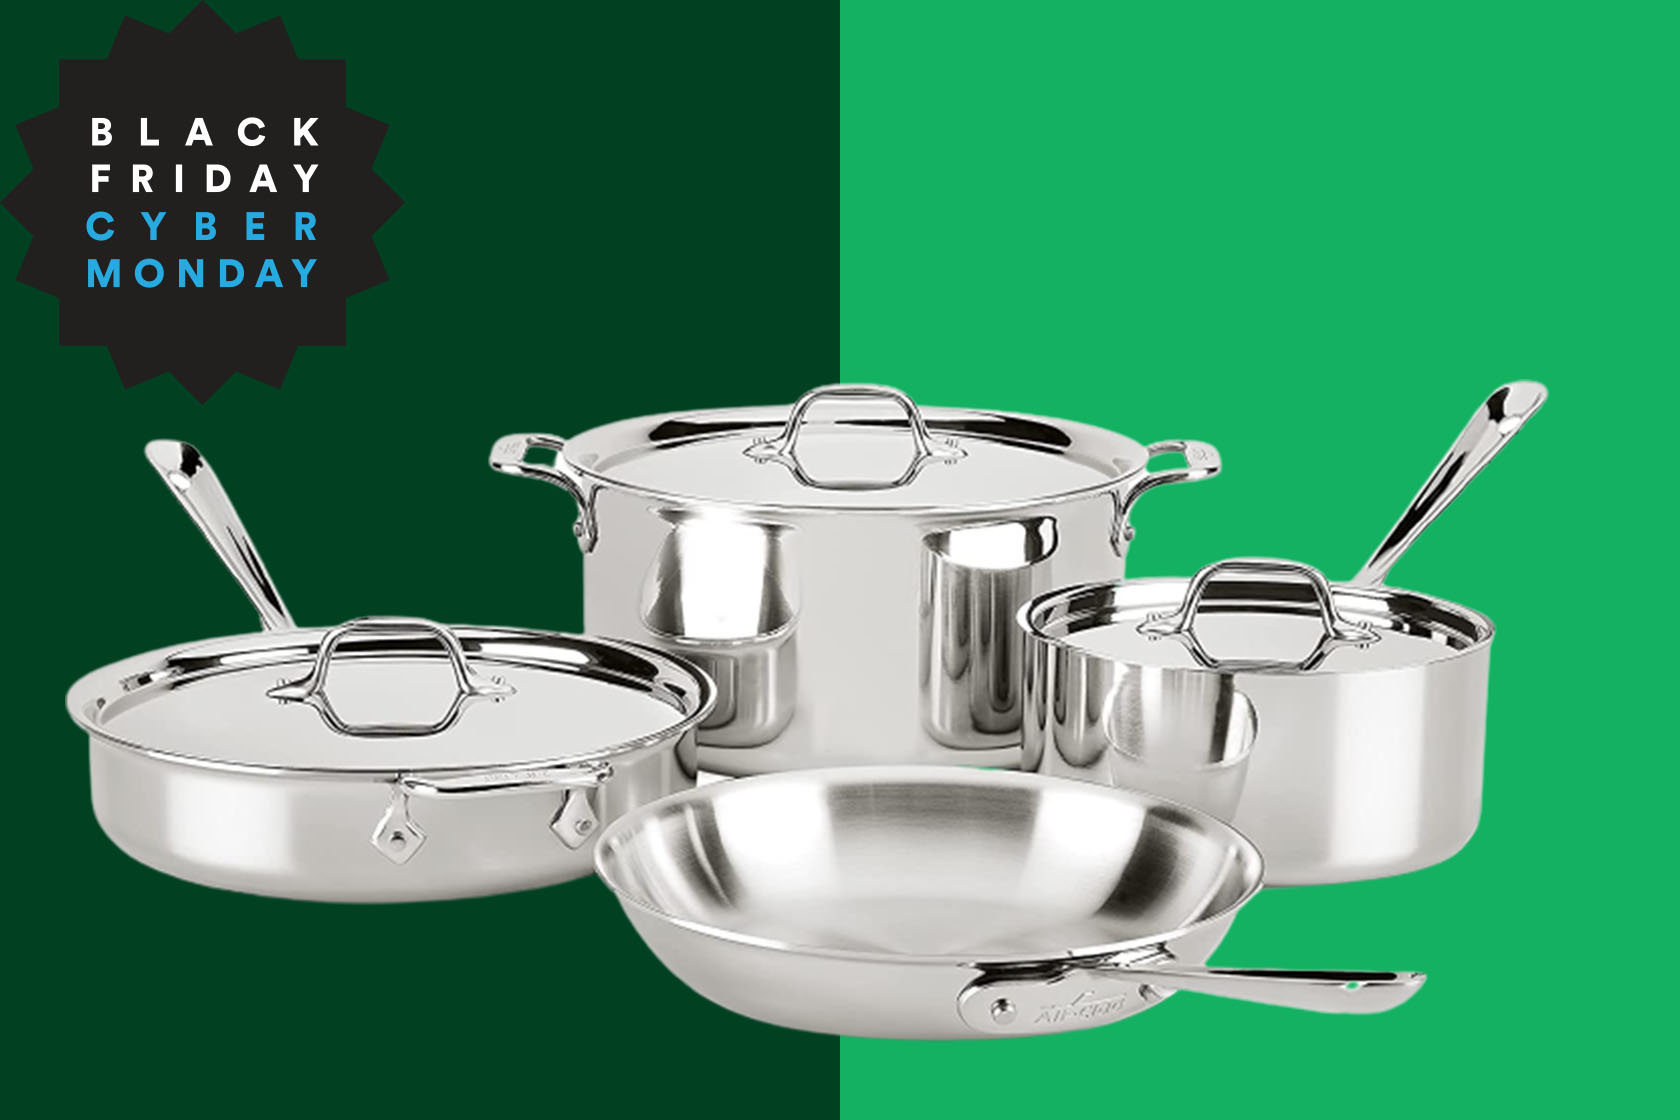 All-Clad: Get early Black Friday 2021 deals on pots, pans and bakeware